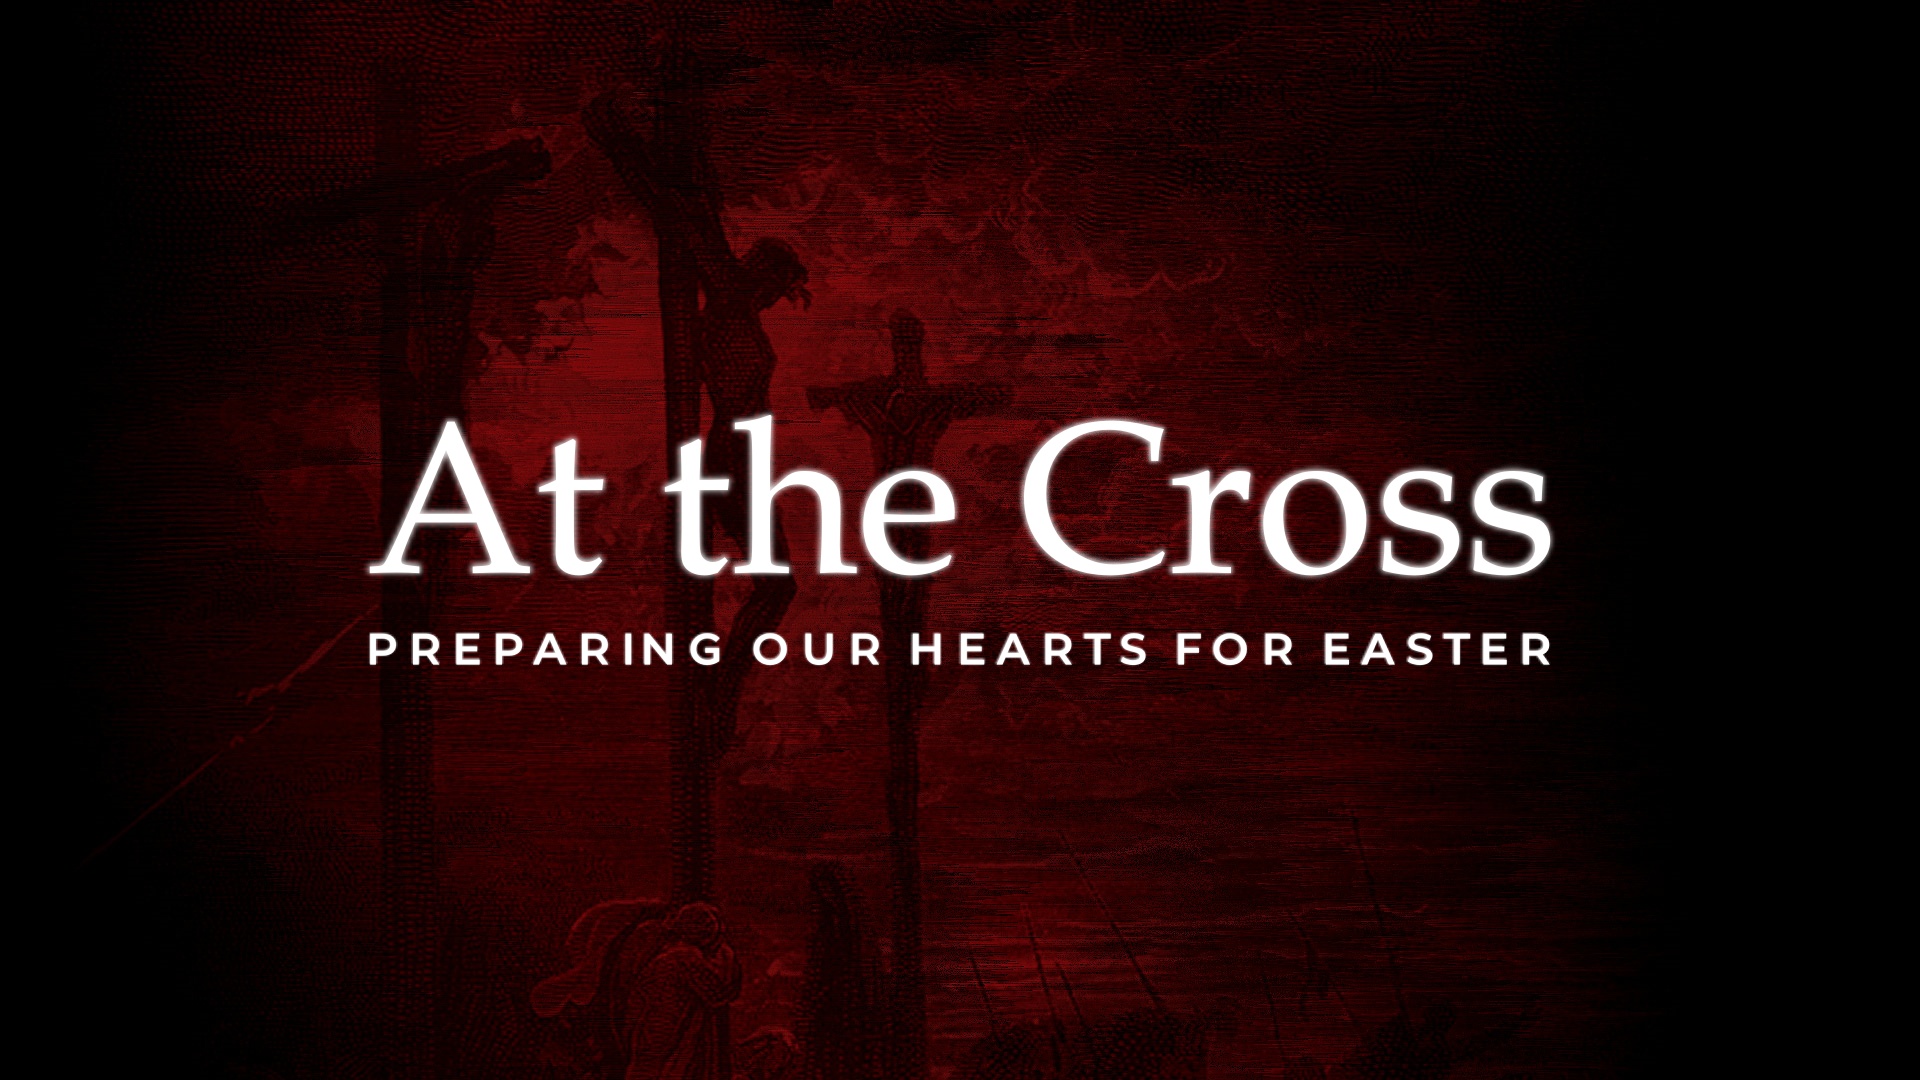 The Cries From the Cross - Part 1